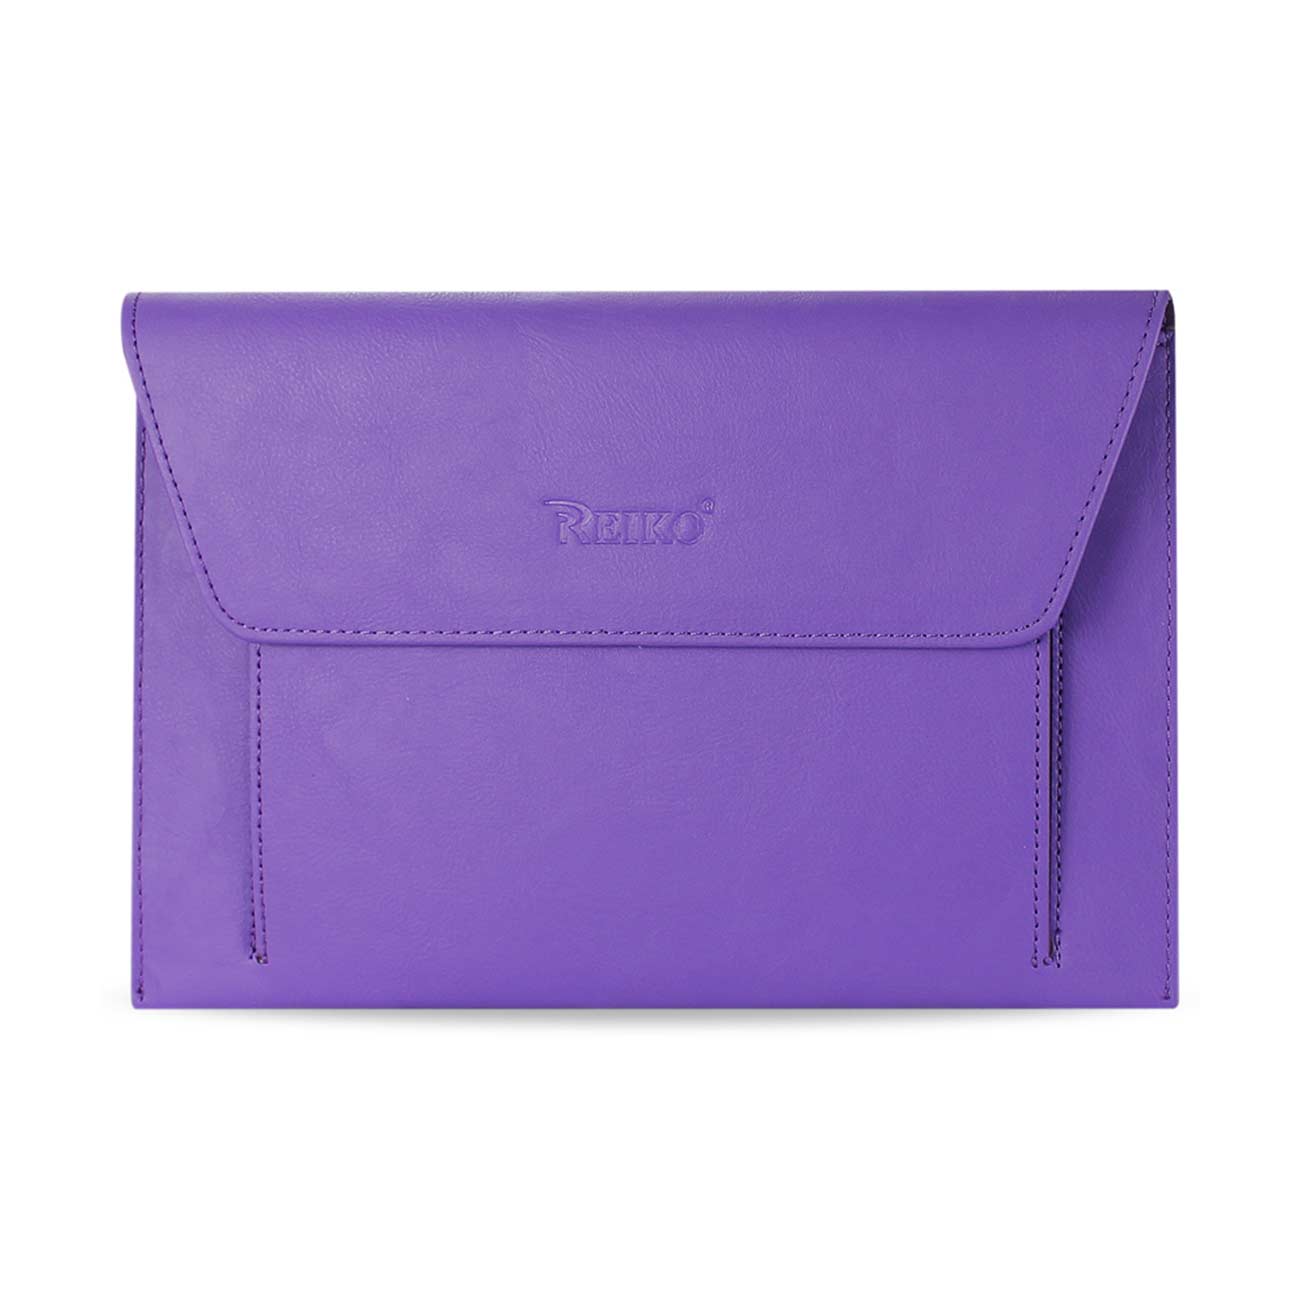 REIKO PREMIUM LEATHER CASE POUCH FOR 7INCHES IPADS AND TABLETS In PURPLE